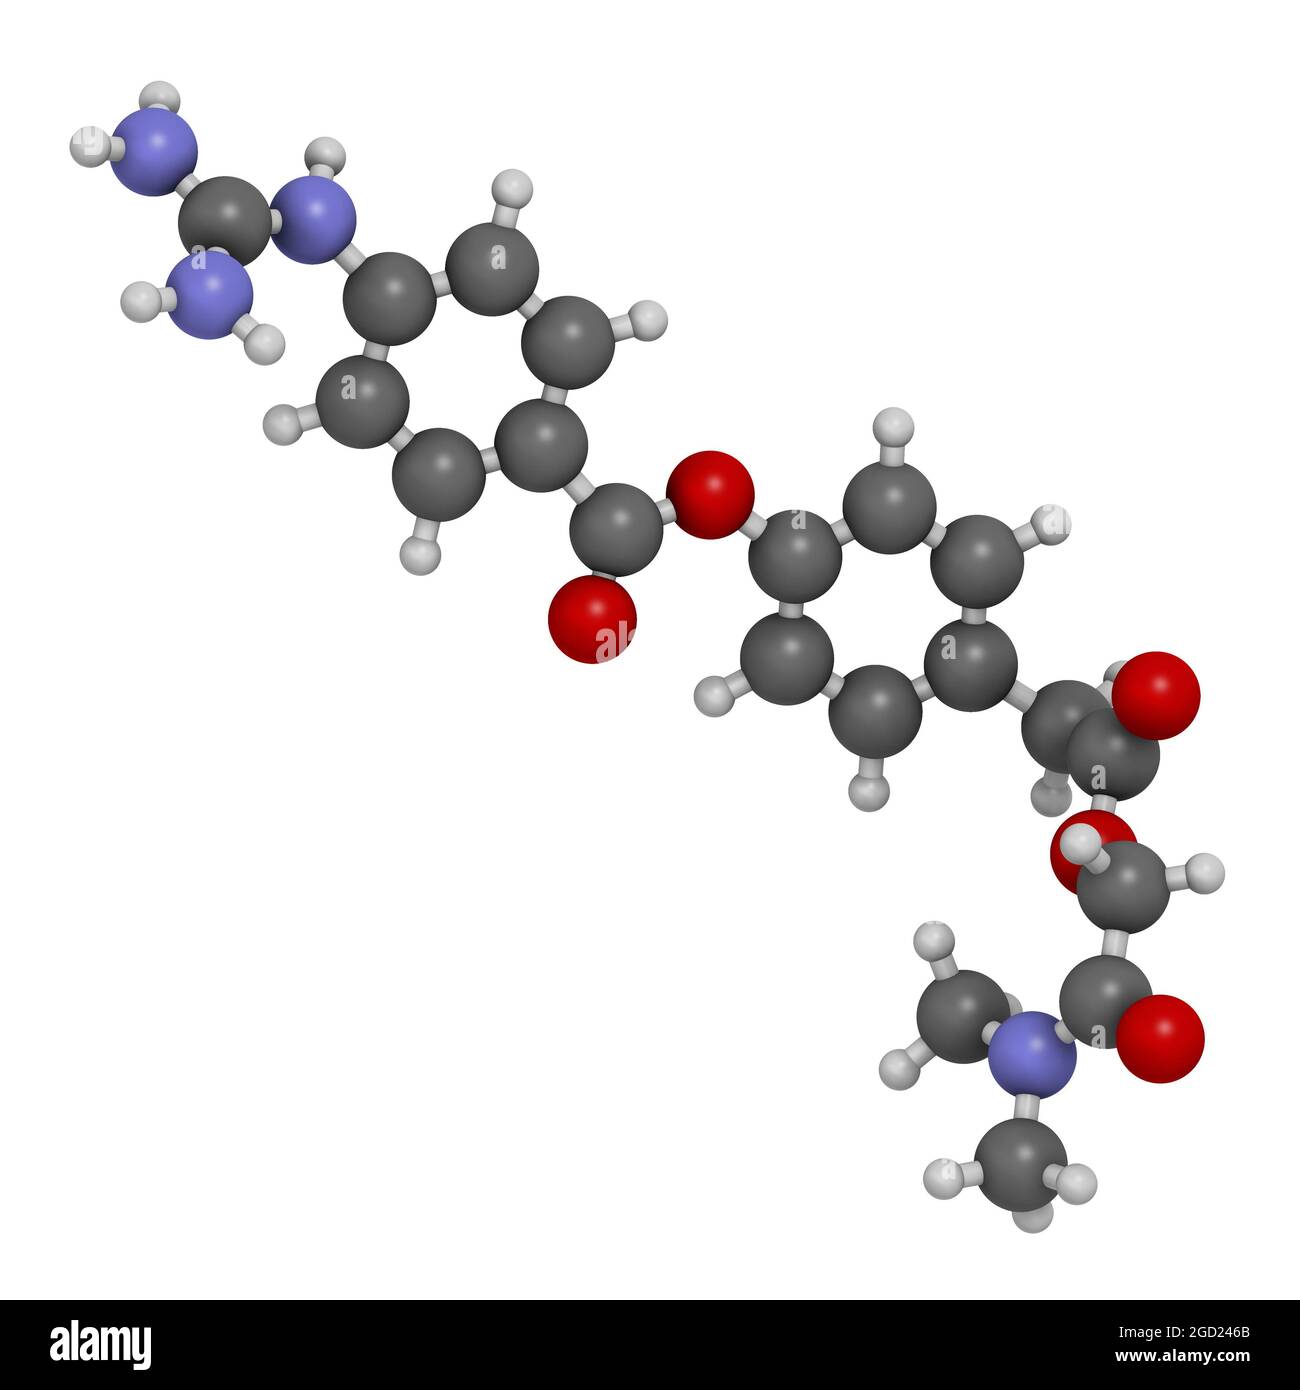 Camostat drug molecule. Serine protease inhibitor, investigated for treatment of Covid-19. 3D render Stock Photo